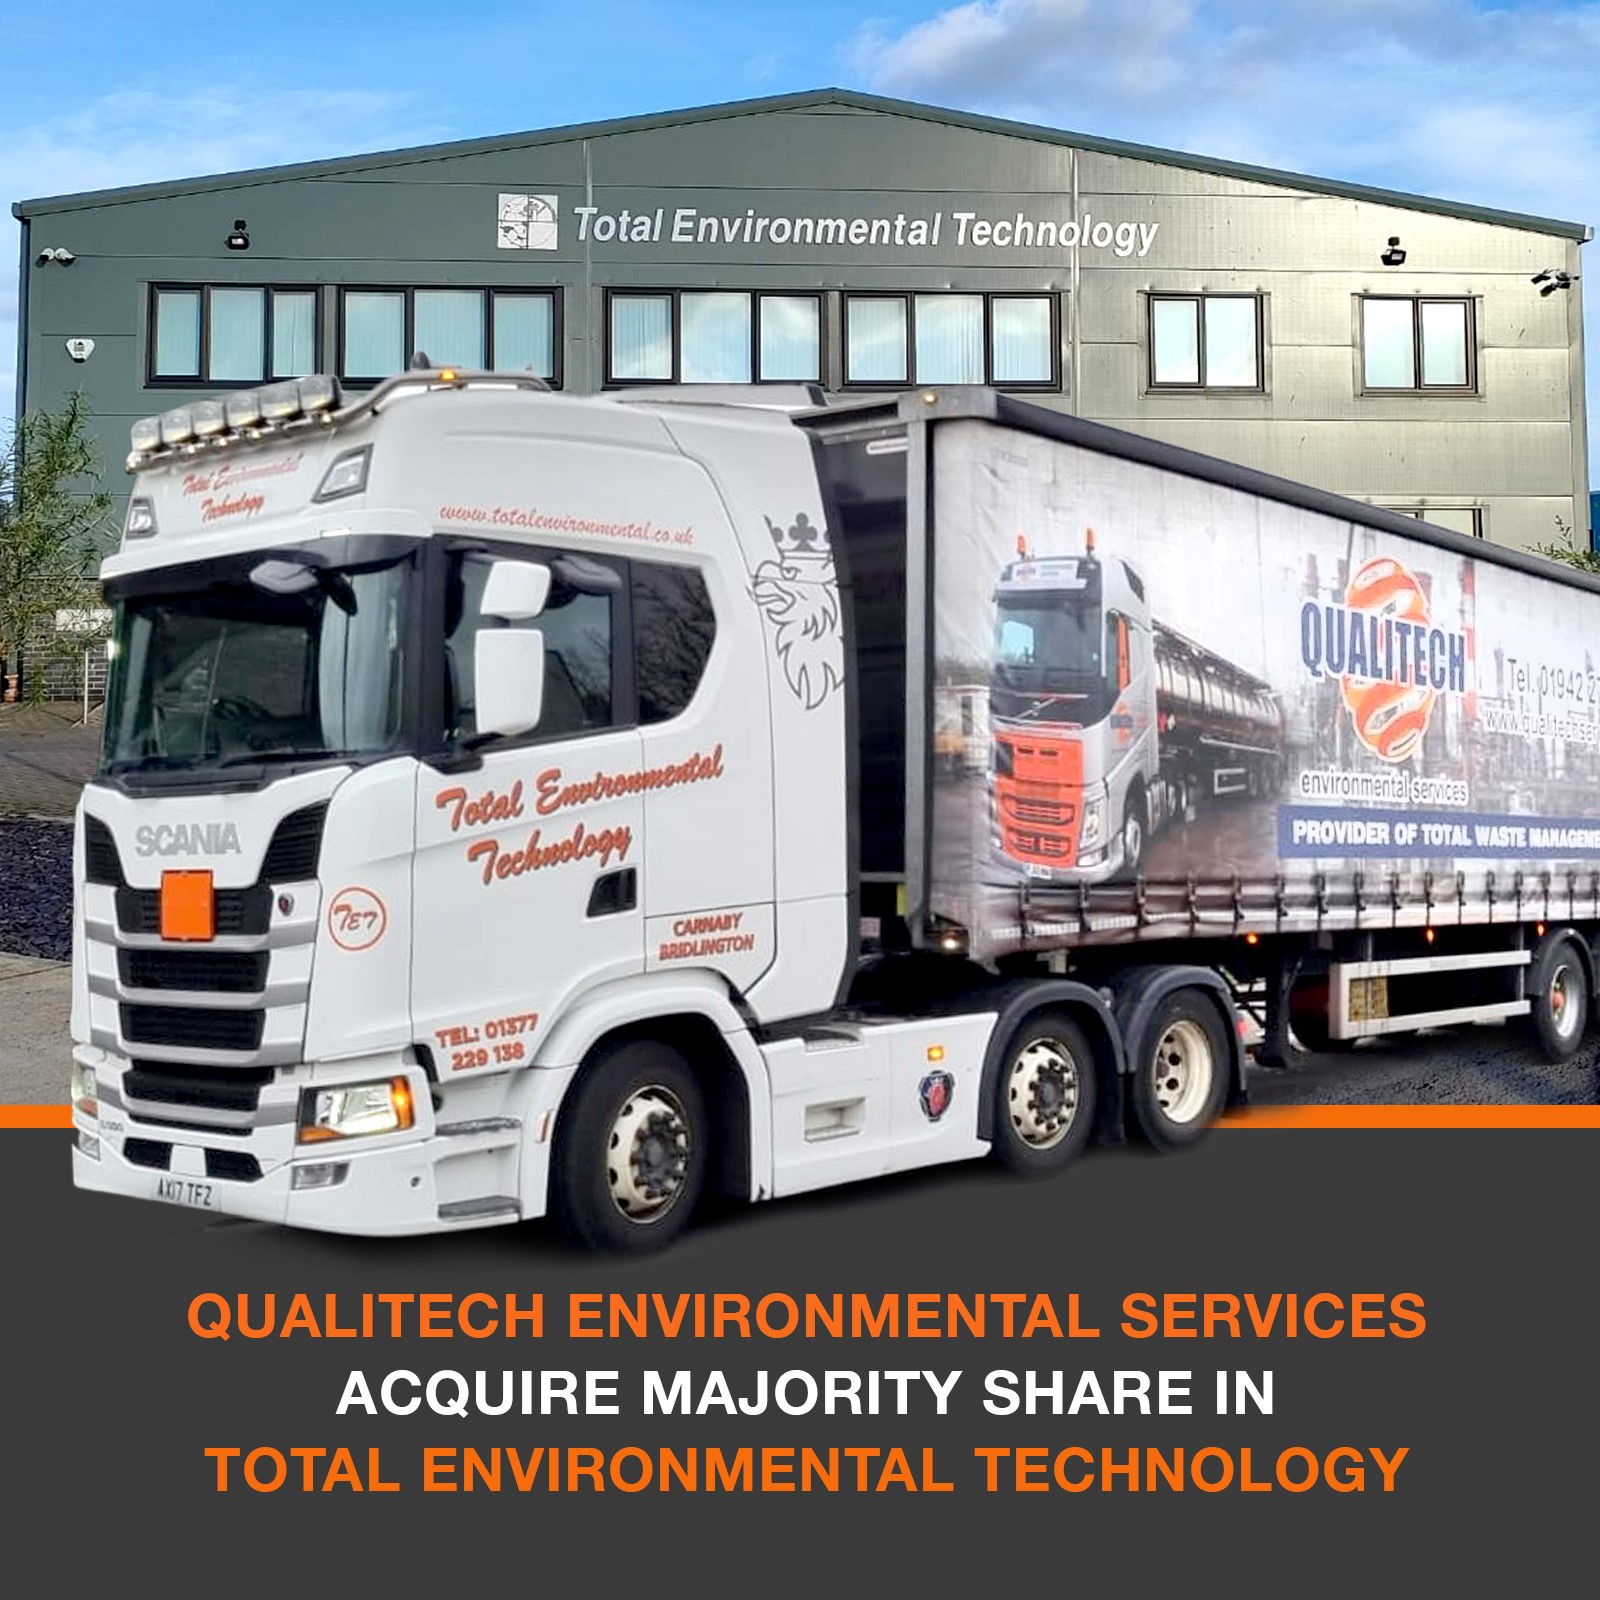 Qualitech Acquire Majority Share In Total Environmental Technology